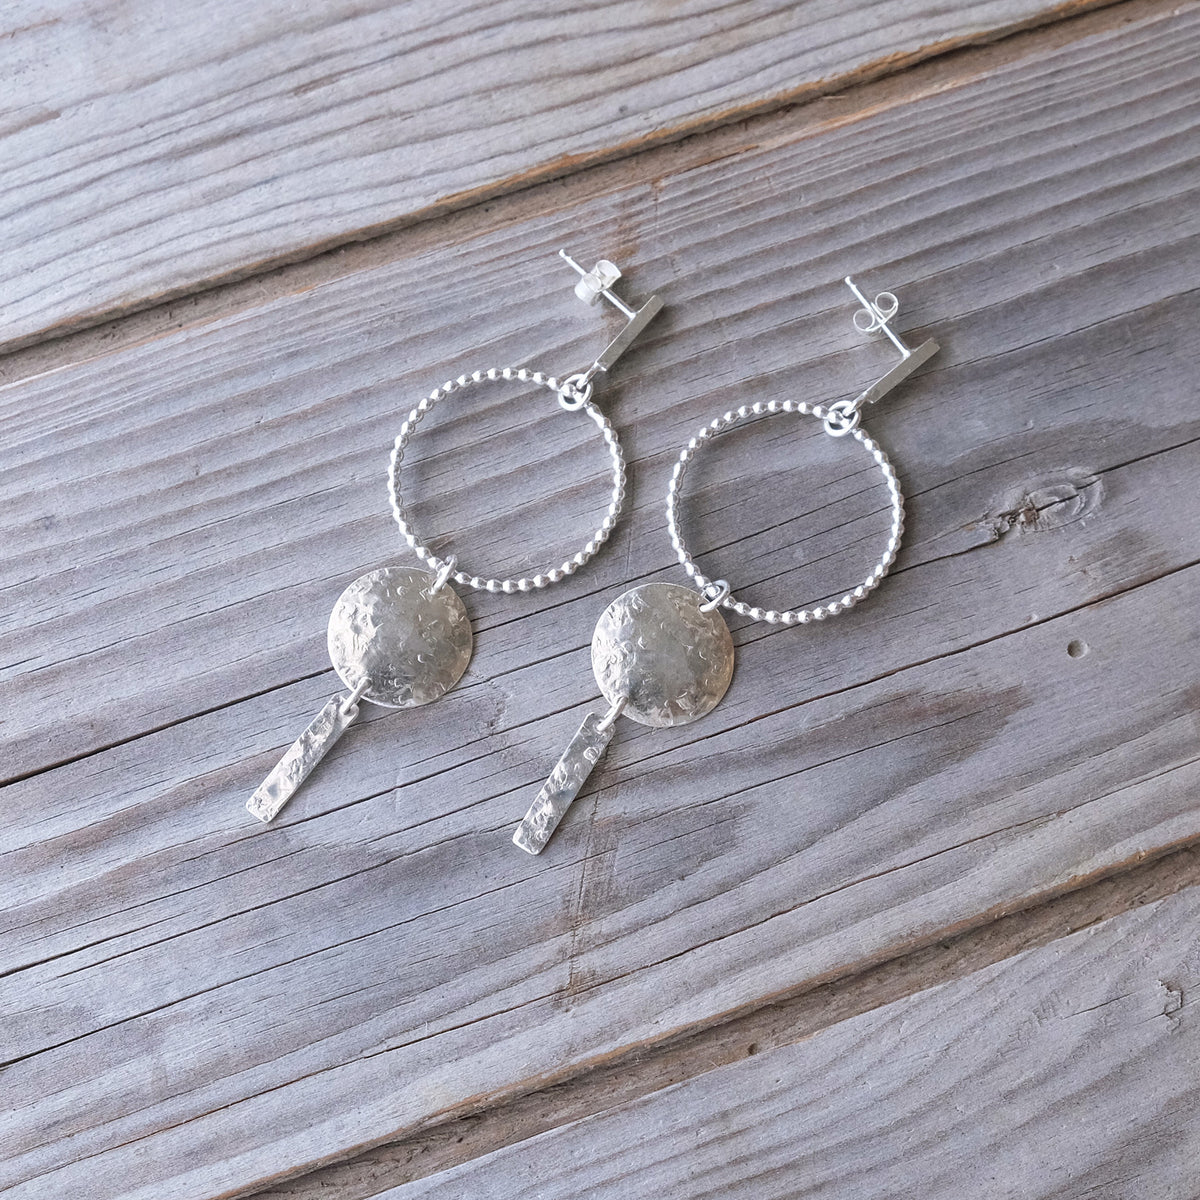 Delicate Geometric Sterling Silver Sun Full Moon Horizon Textured Hammered Earring Dangle Posts - Glass Sky Jewelry - Handmade in Columbus Ohio by artist Andrea Kaiser